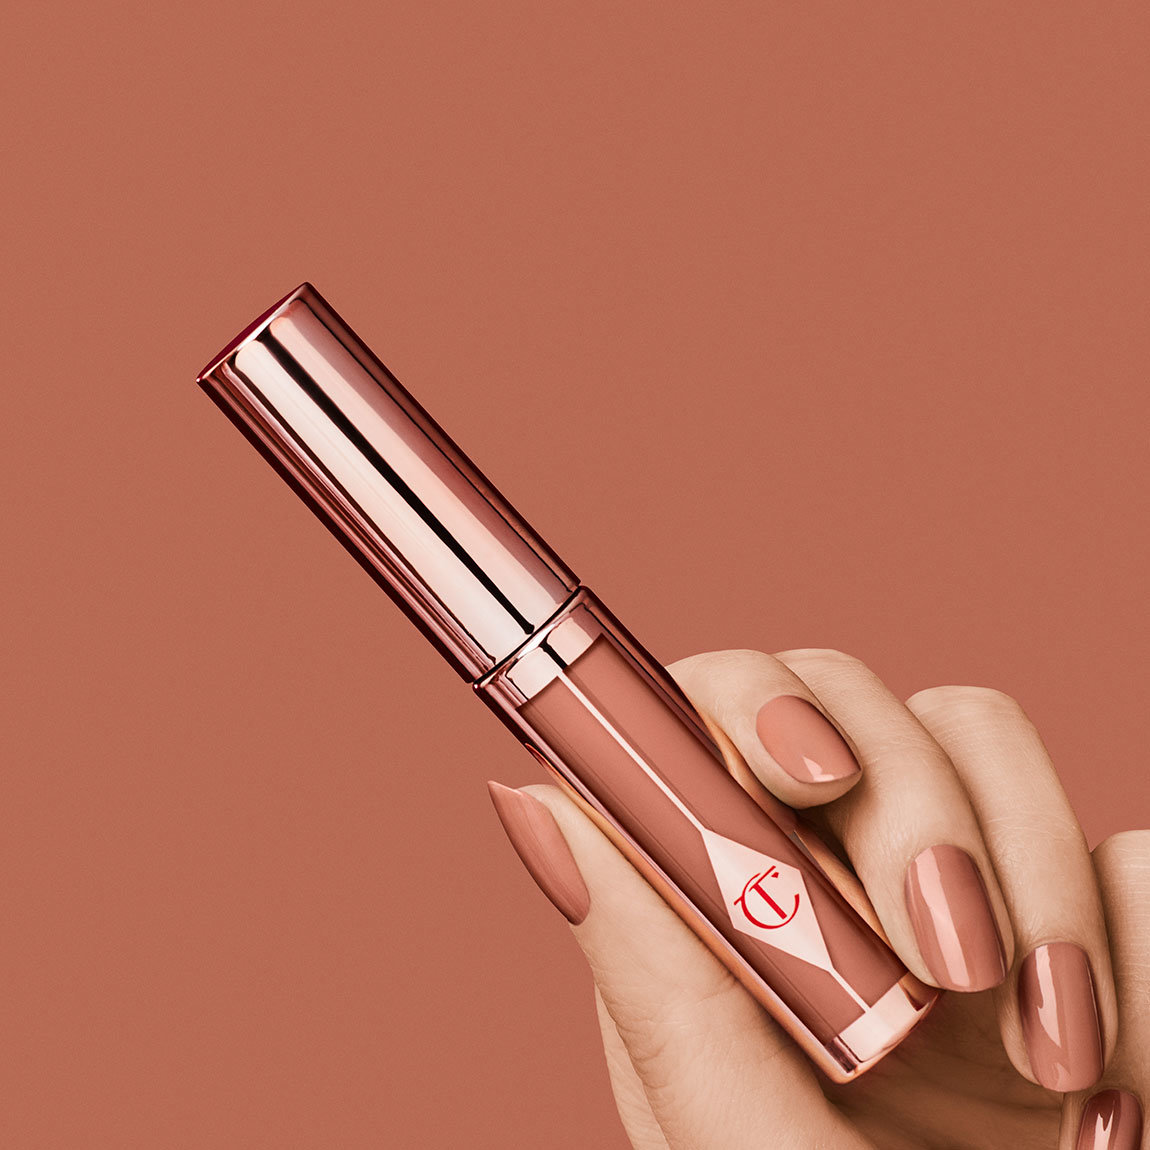 Charlotte Tilbury Hollywood Lips in Best Actress